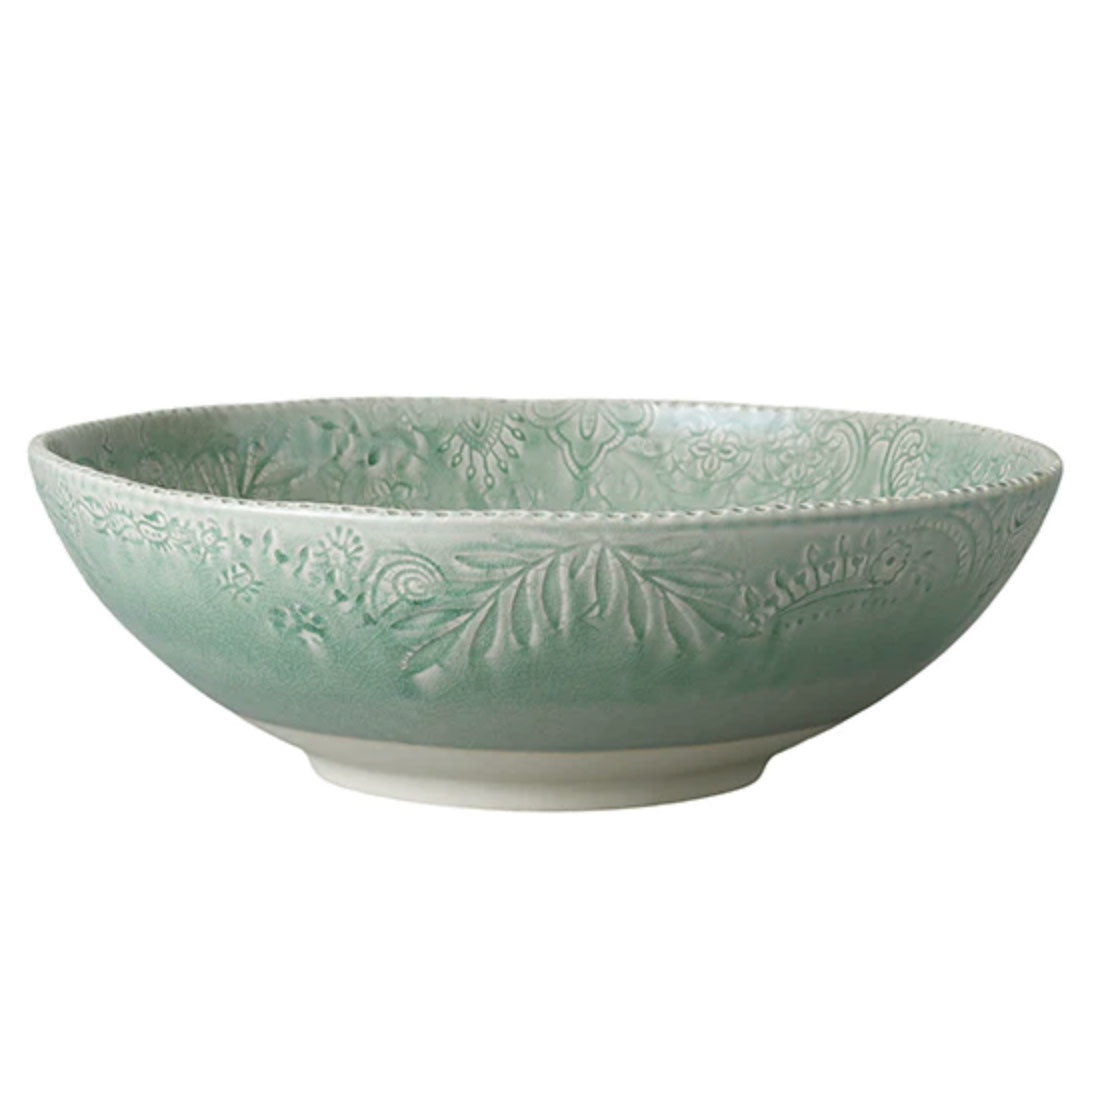 Extra large ceramic serving bowl with textured surface design.